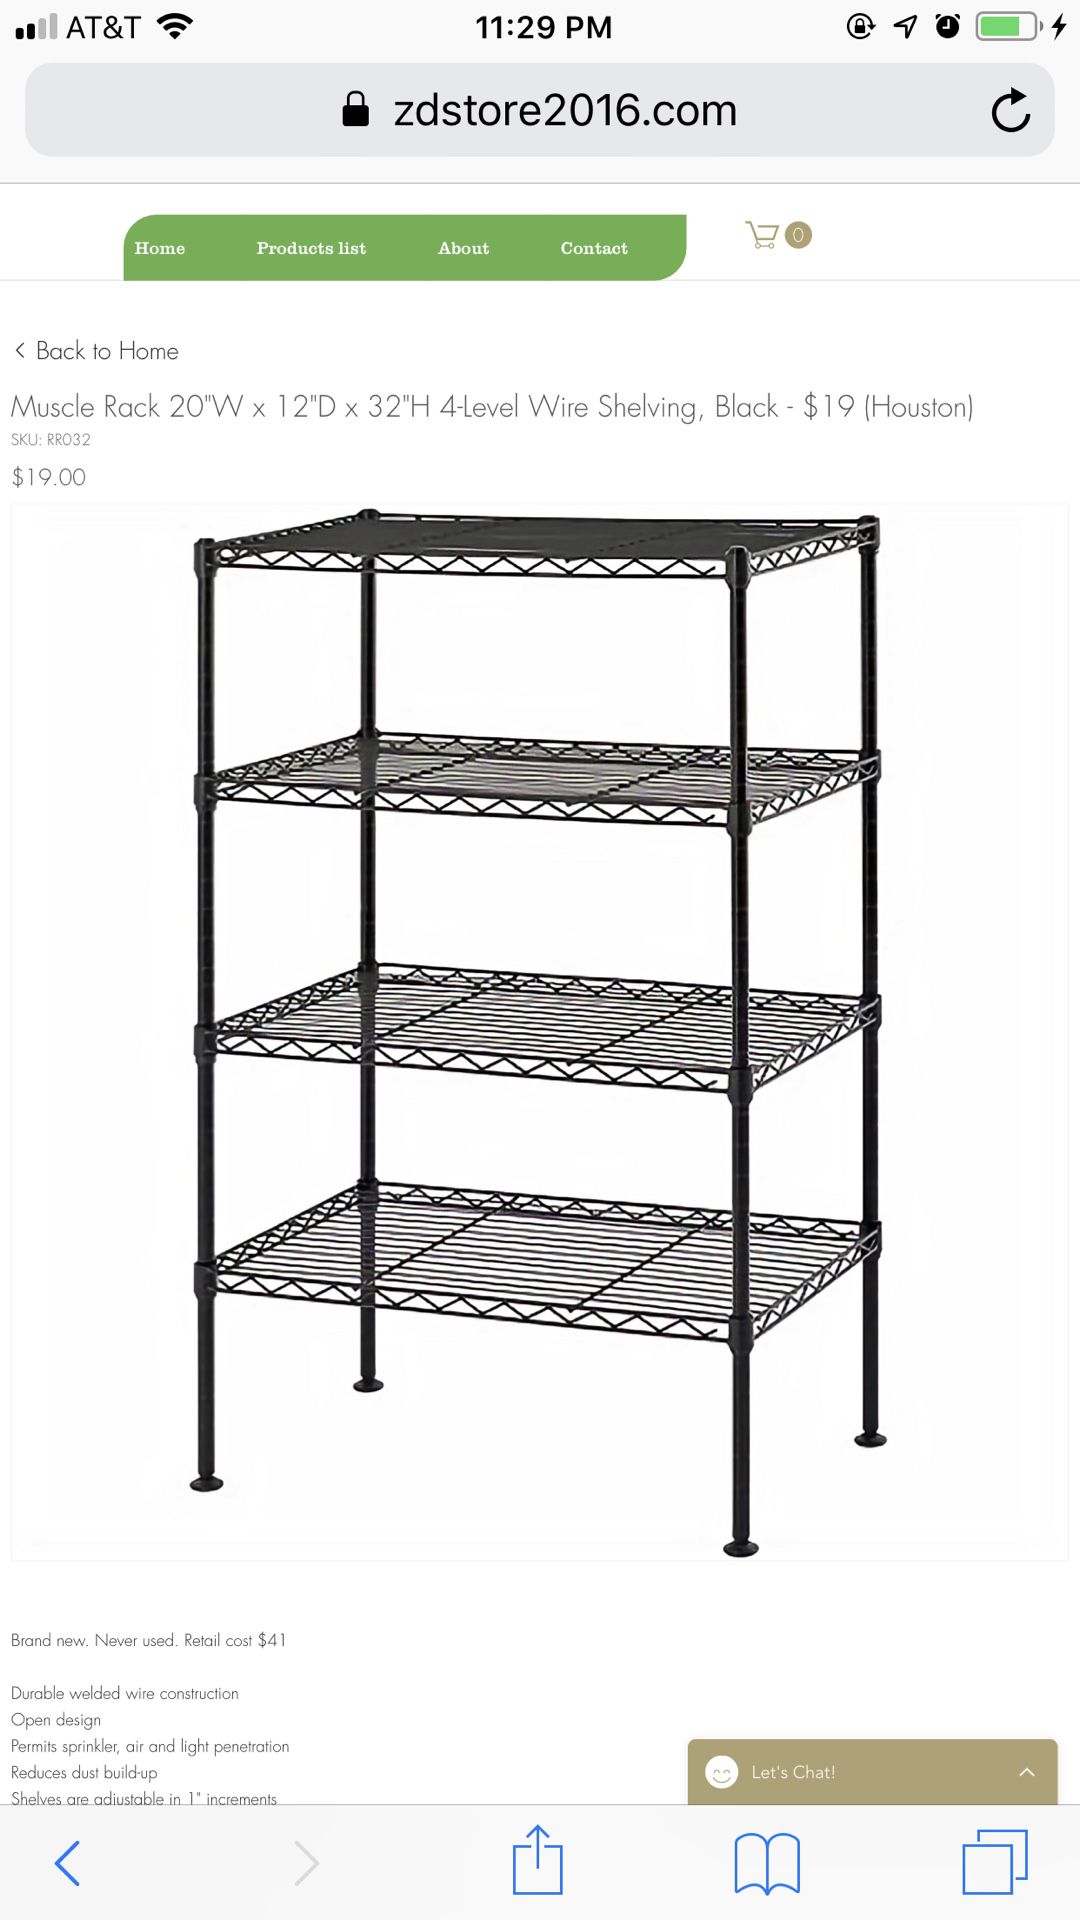 Muscle Rack 20"W x 12"D x 32"H 4-Level Wire Shelving, Black - $19 (Housto